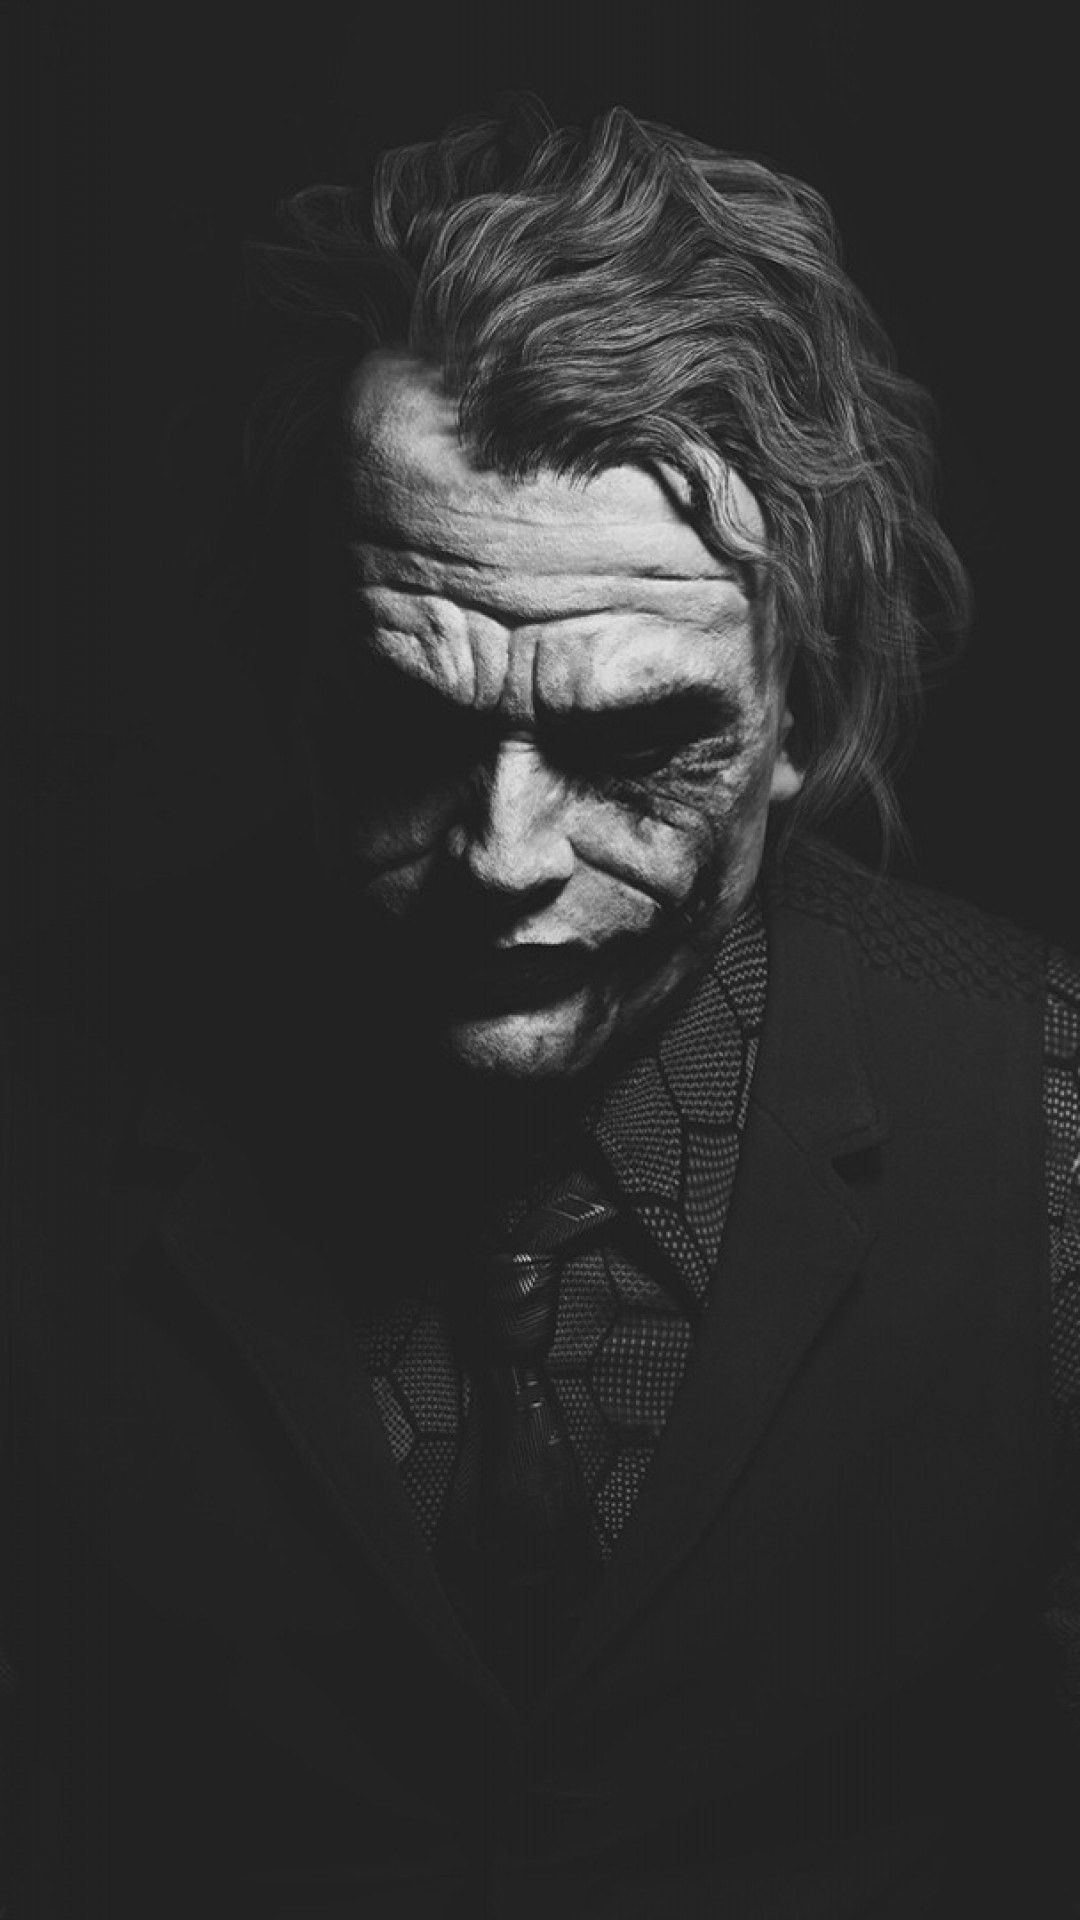 1080x1920 Why so serious? The Joker. Batman Wallpaper Iphone, Hd Wallpapers For  Iphone,